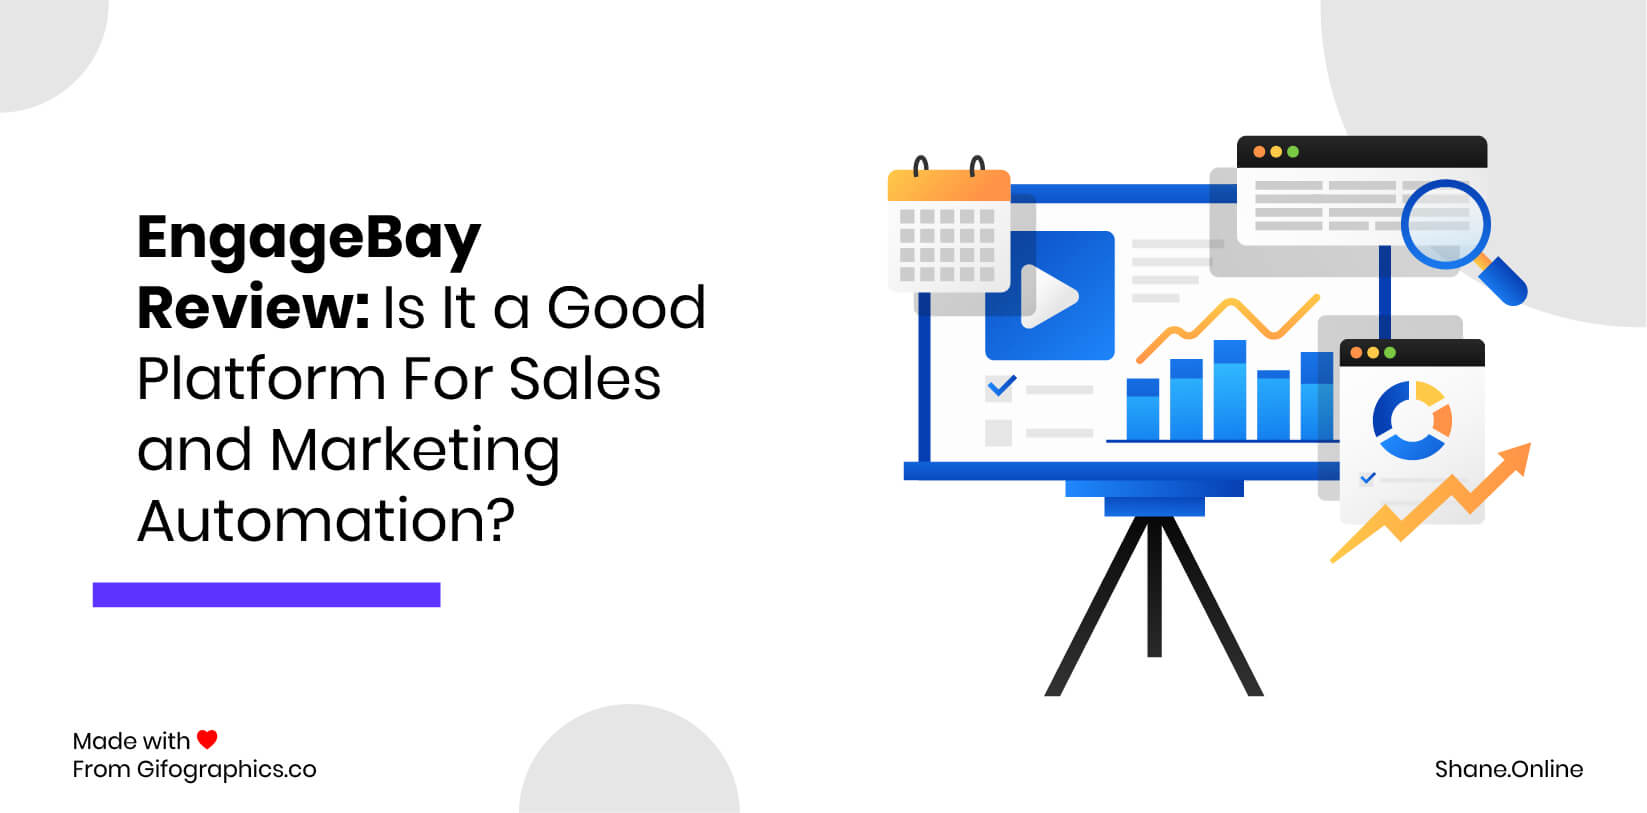 EngageBay Review- Is It a Good Platform For Sales and Marketing Automation